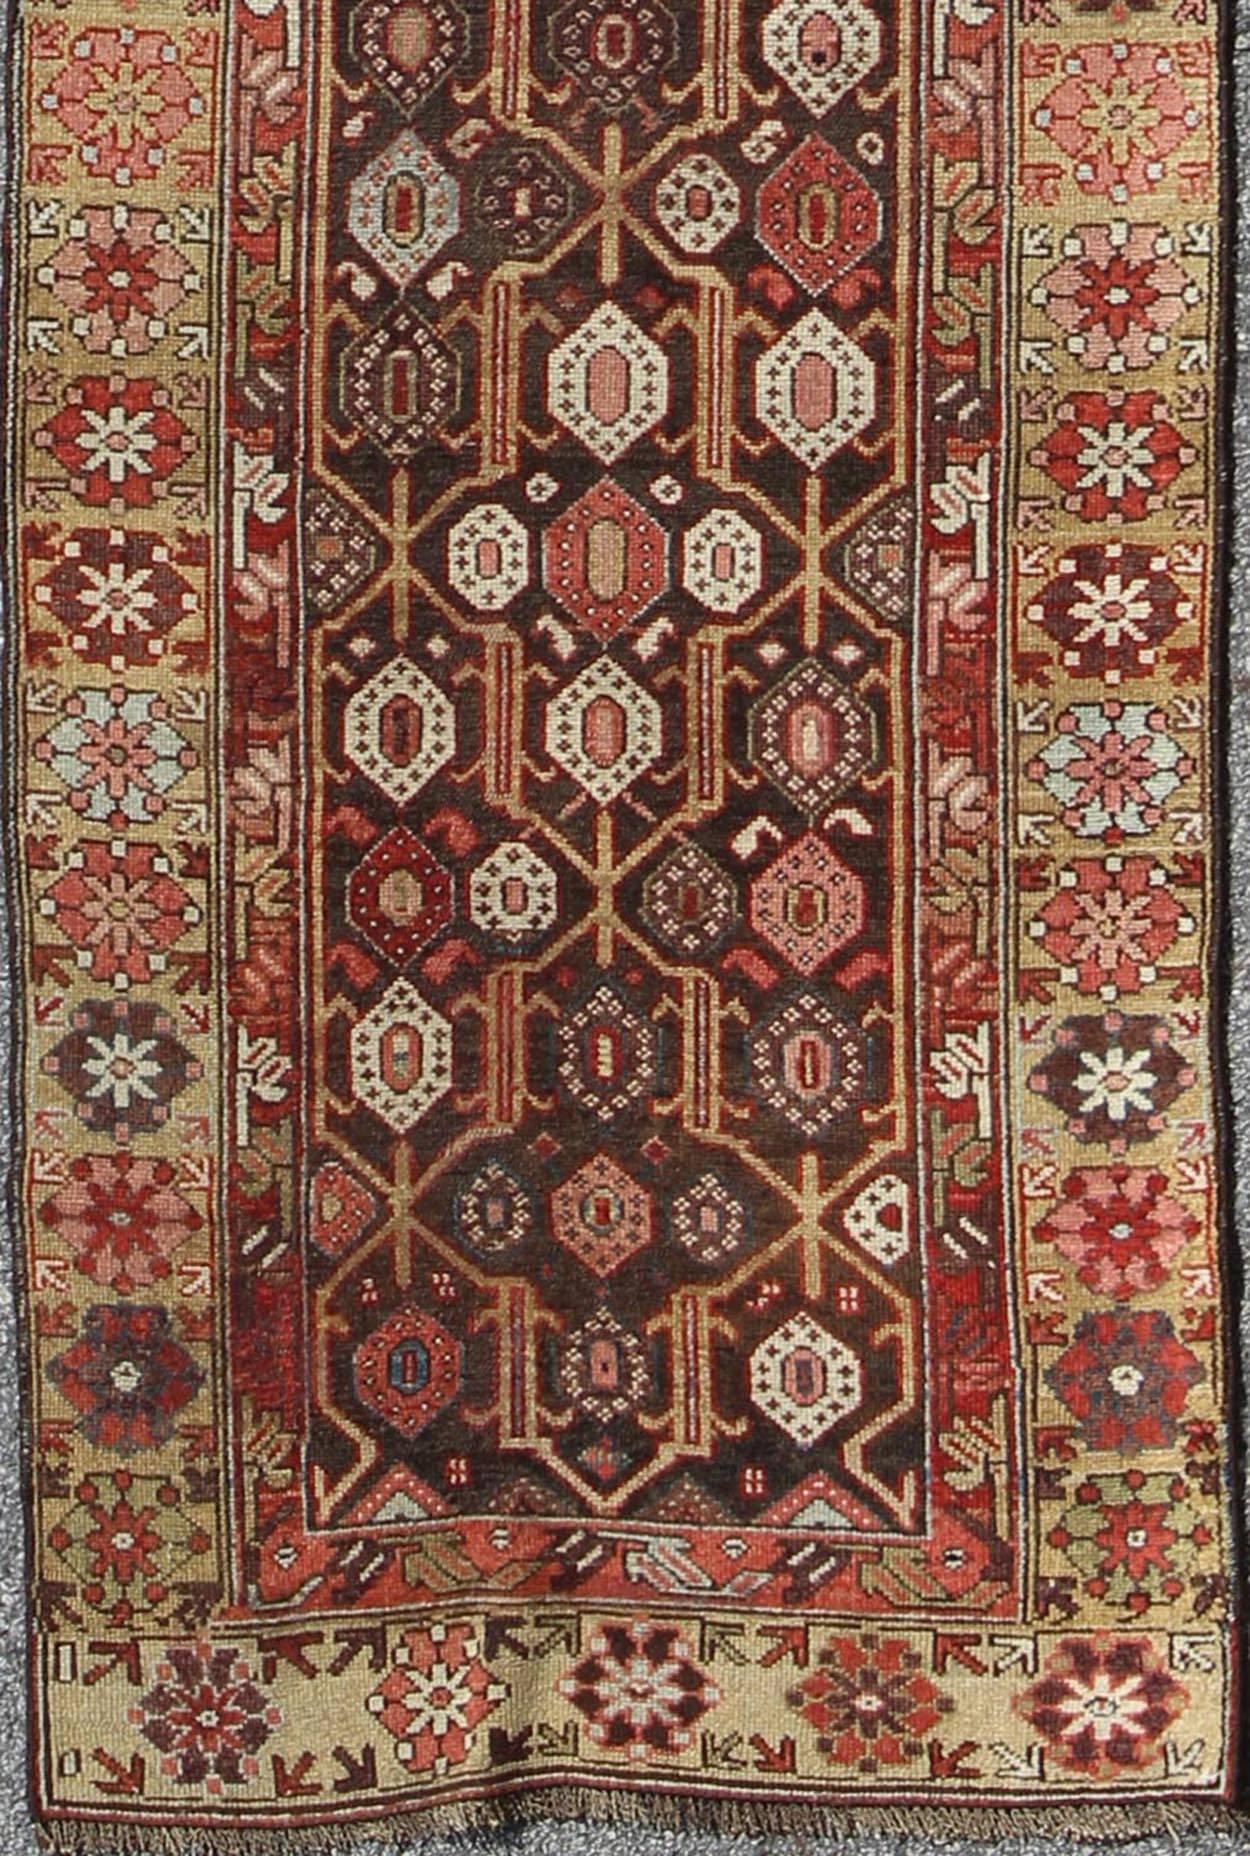 Antique hand knotted Kurdish Runner with all-over Geometric design. Keivan Woven Arts / rug/13-1103, country of origin / type: Iran / Kurdish, circa 1900

This Kurdish tribal runner was woven by Kurdish weavers in western Persia. The emphasis with